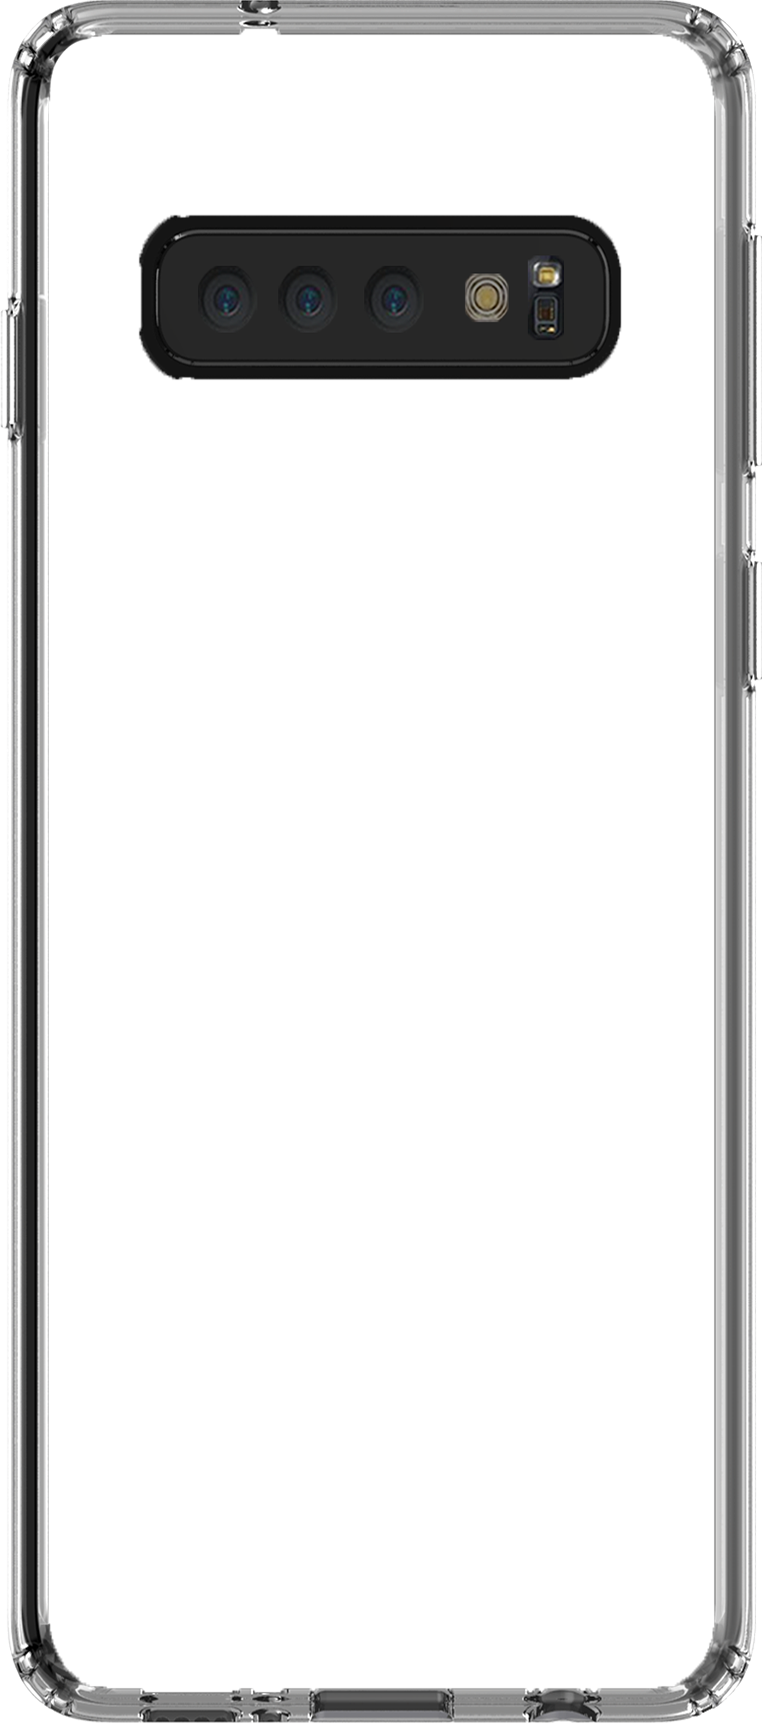 Samsunggalaxy s10 clearcase overlay